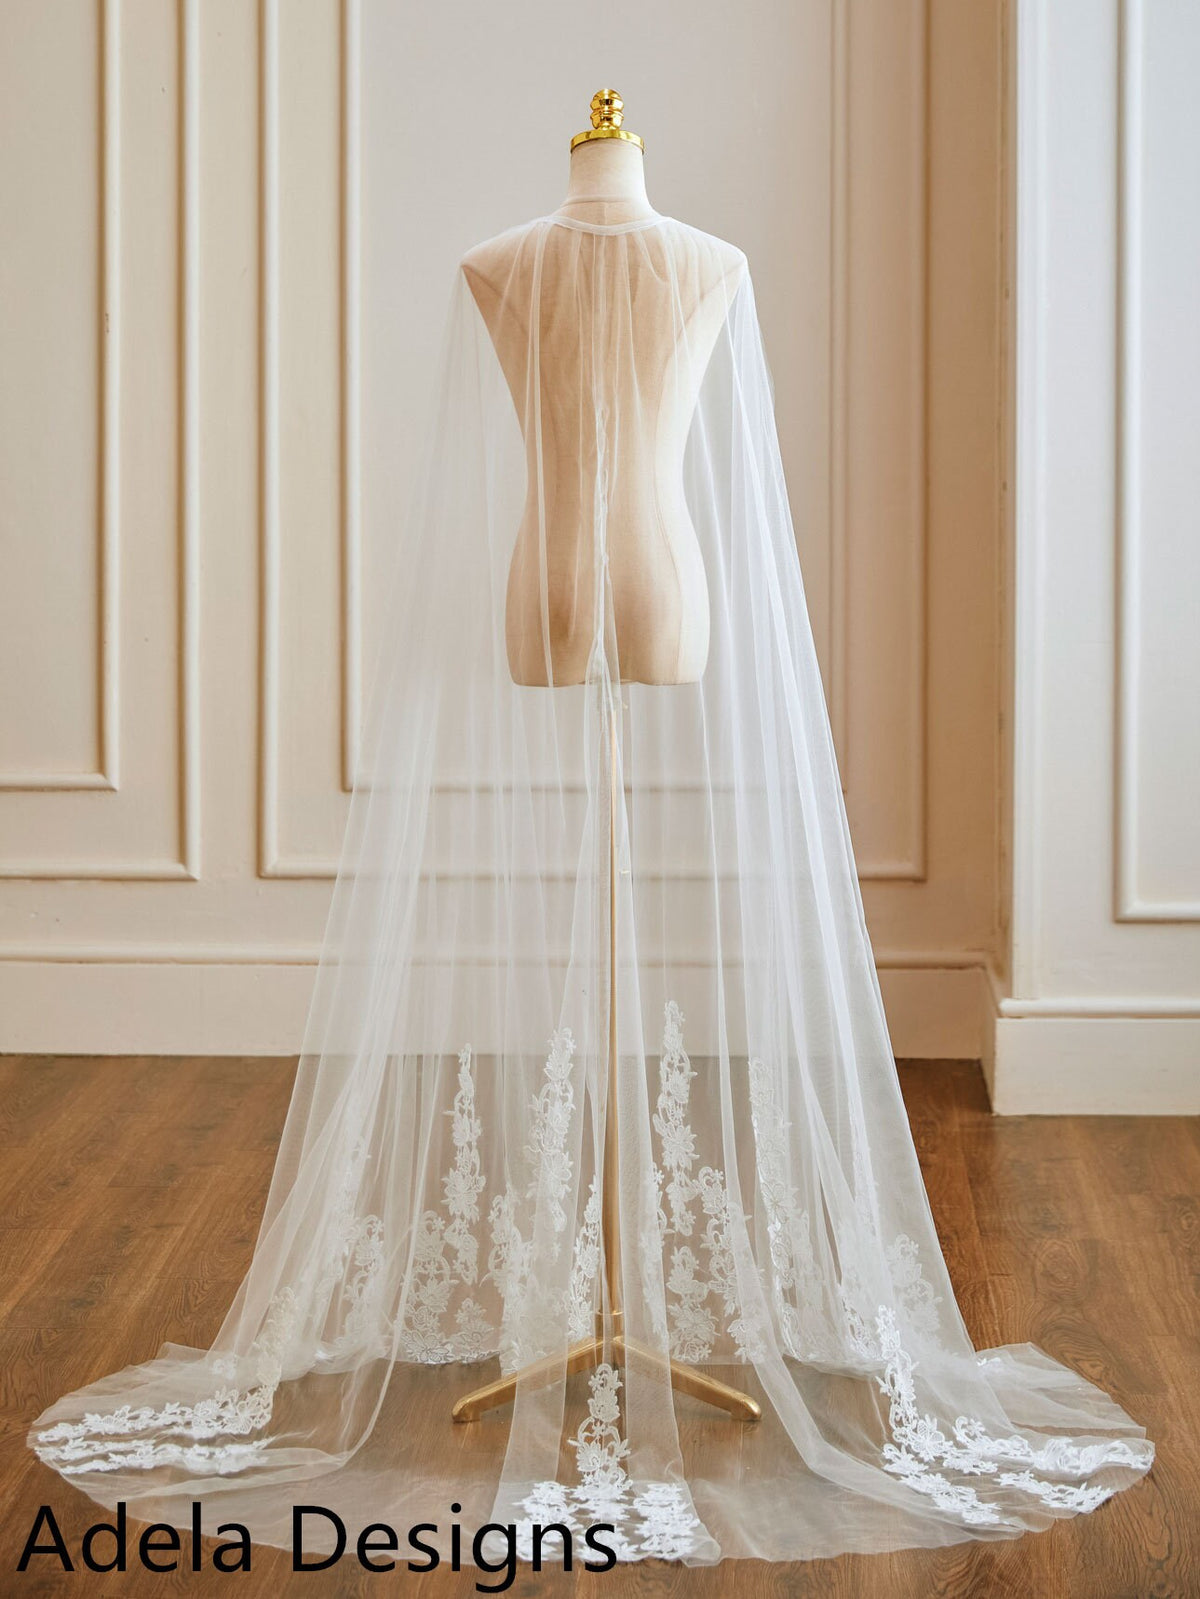 Wedding Cape Veil Delicate Lace Long Bridal Shoulder Veil In Ivory or White Lace Bottom and Edge Cape Veil